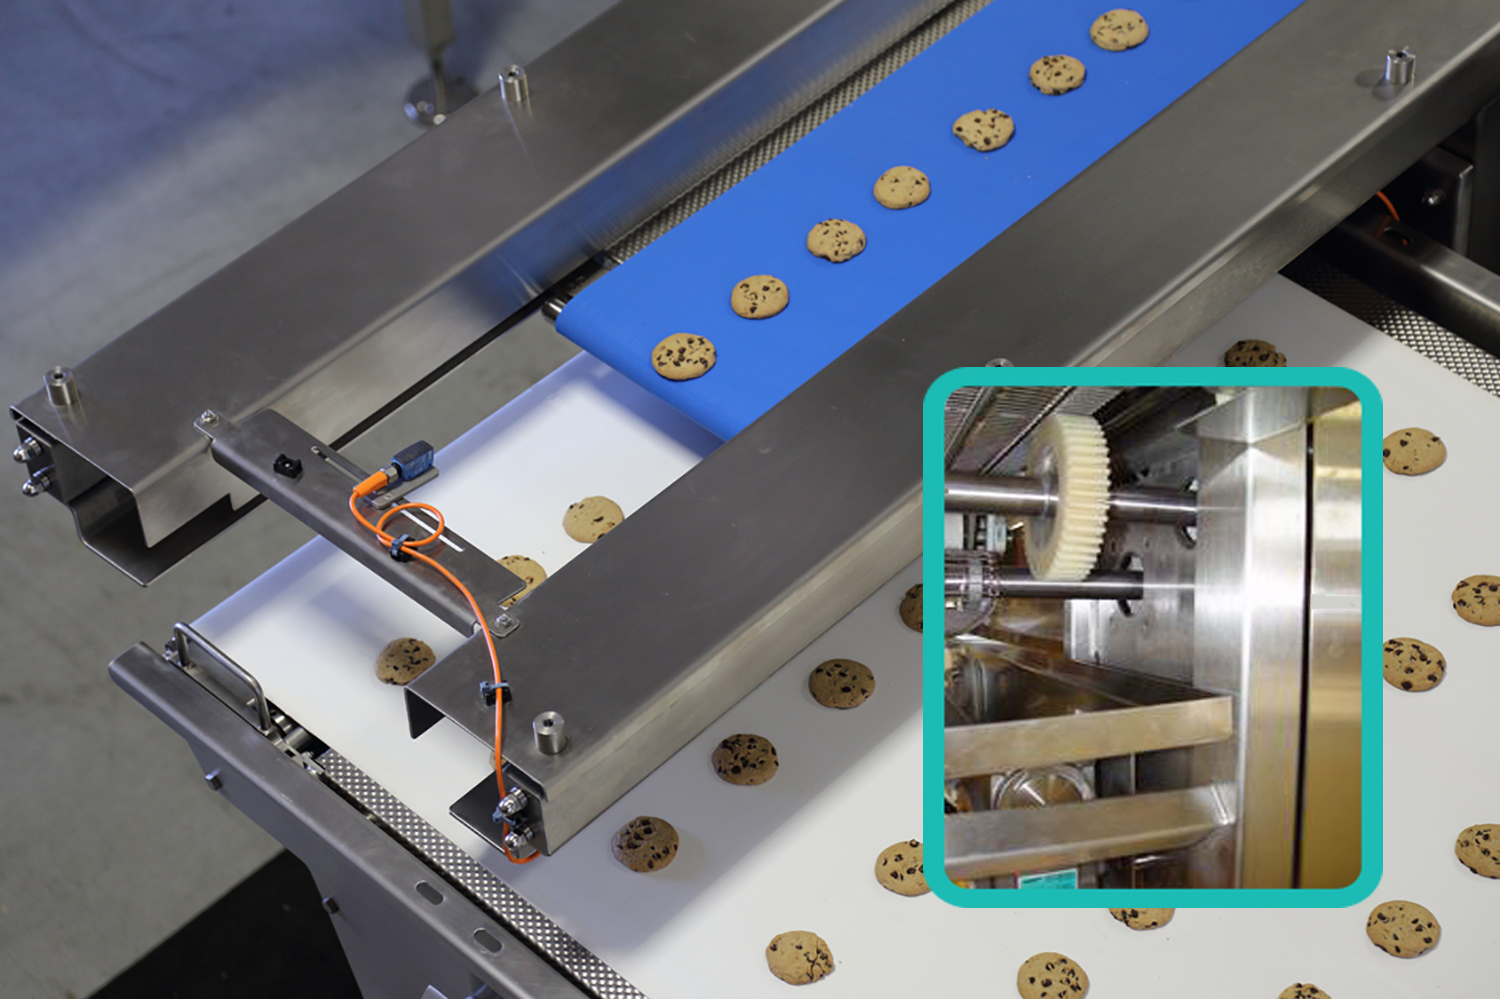 KLEENLine retractable conveyors use precision-machined PowerCore open gearing from Intech Corp. for better washdown